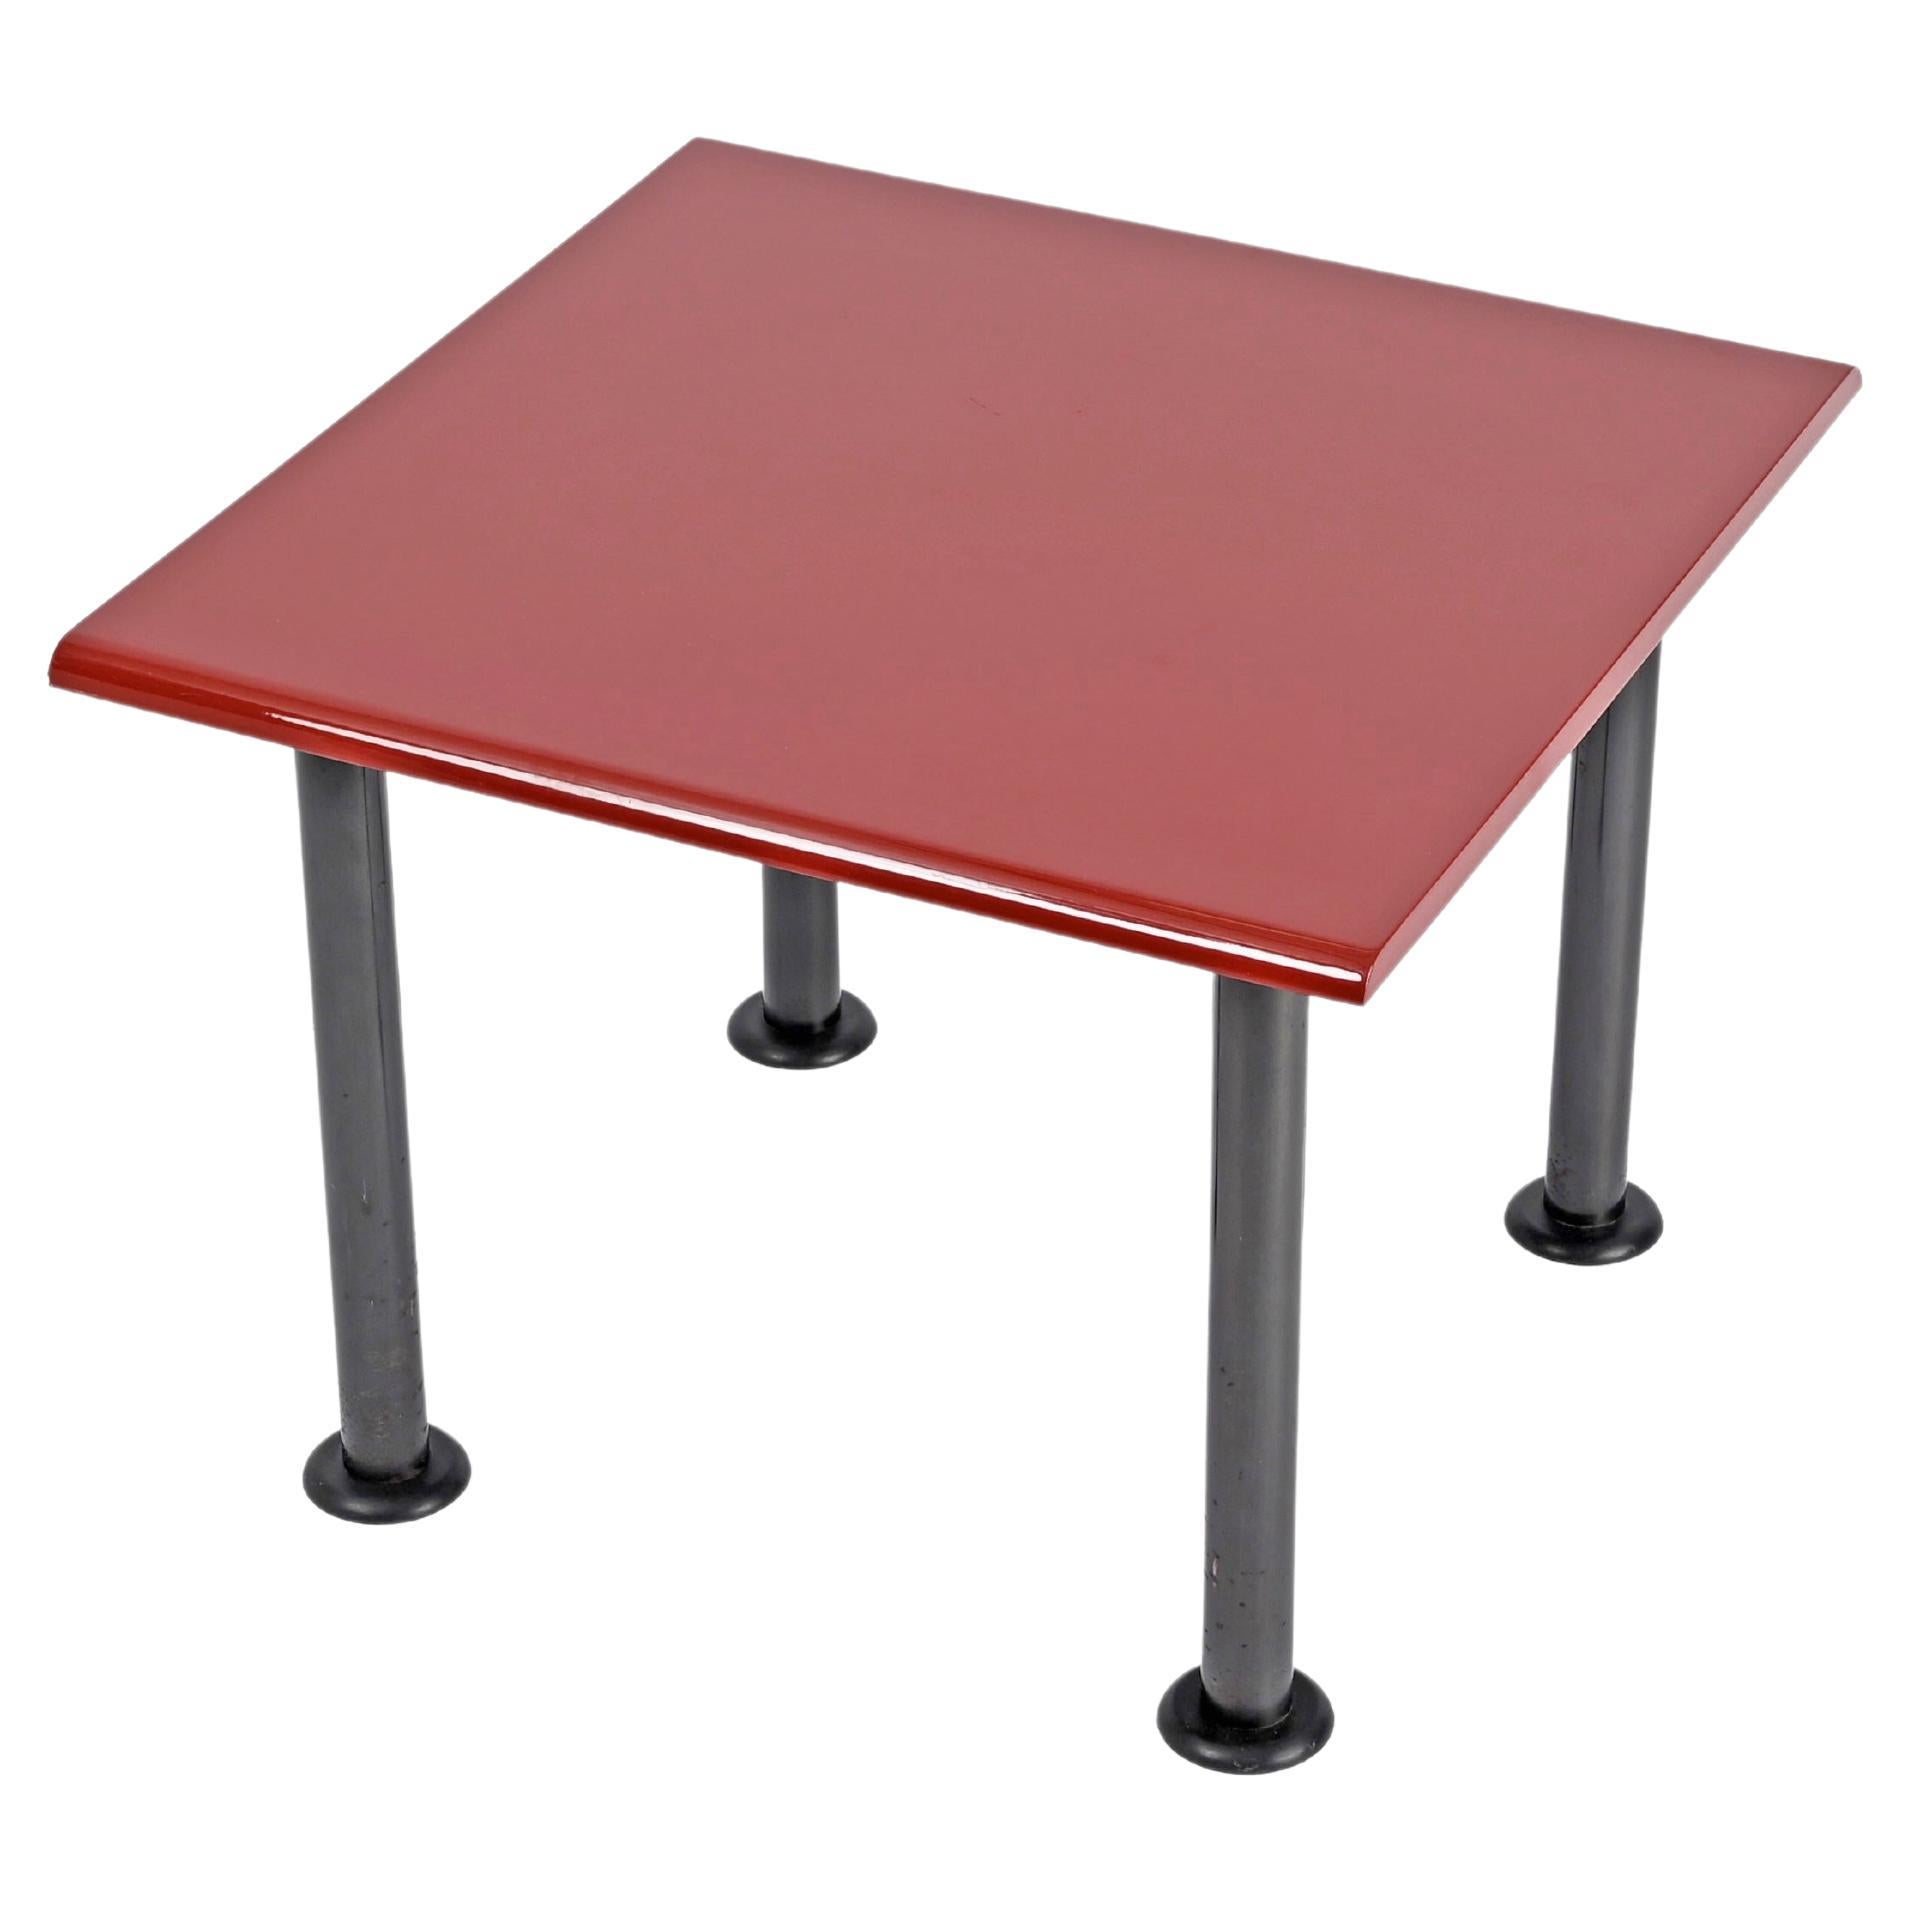 Midcentury Memphis Style Square Coffee Table with Cardinal Red Top, Italy 1980s For Sale